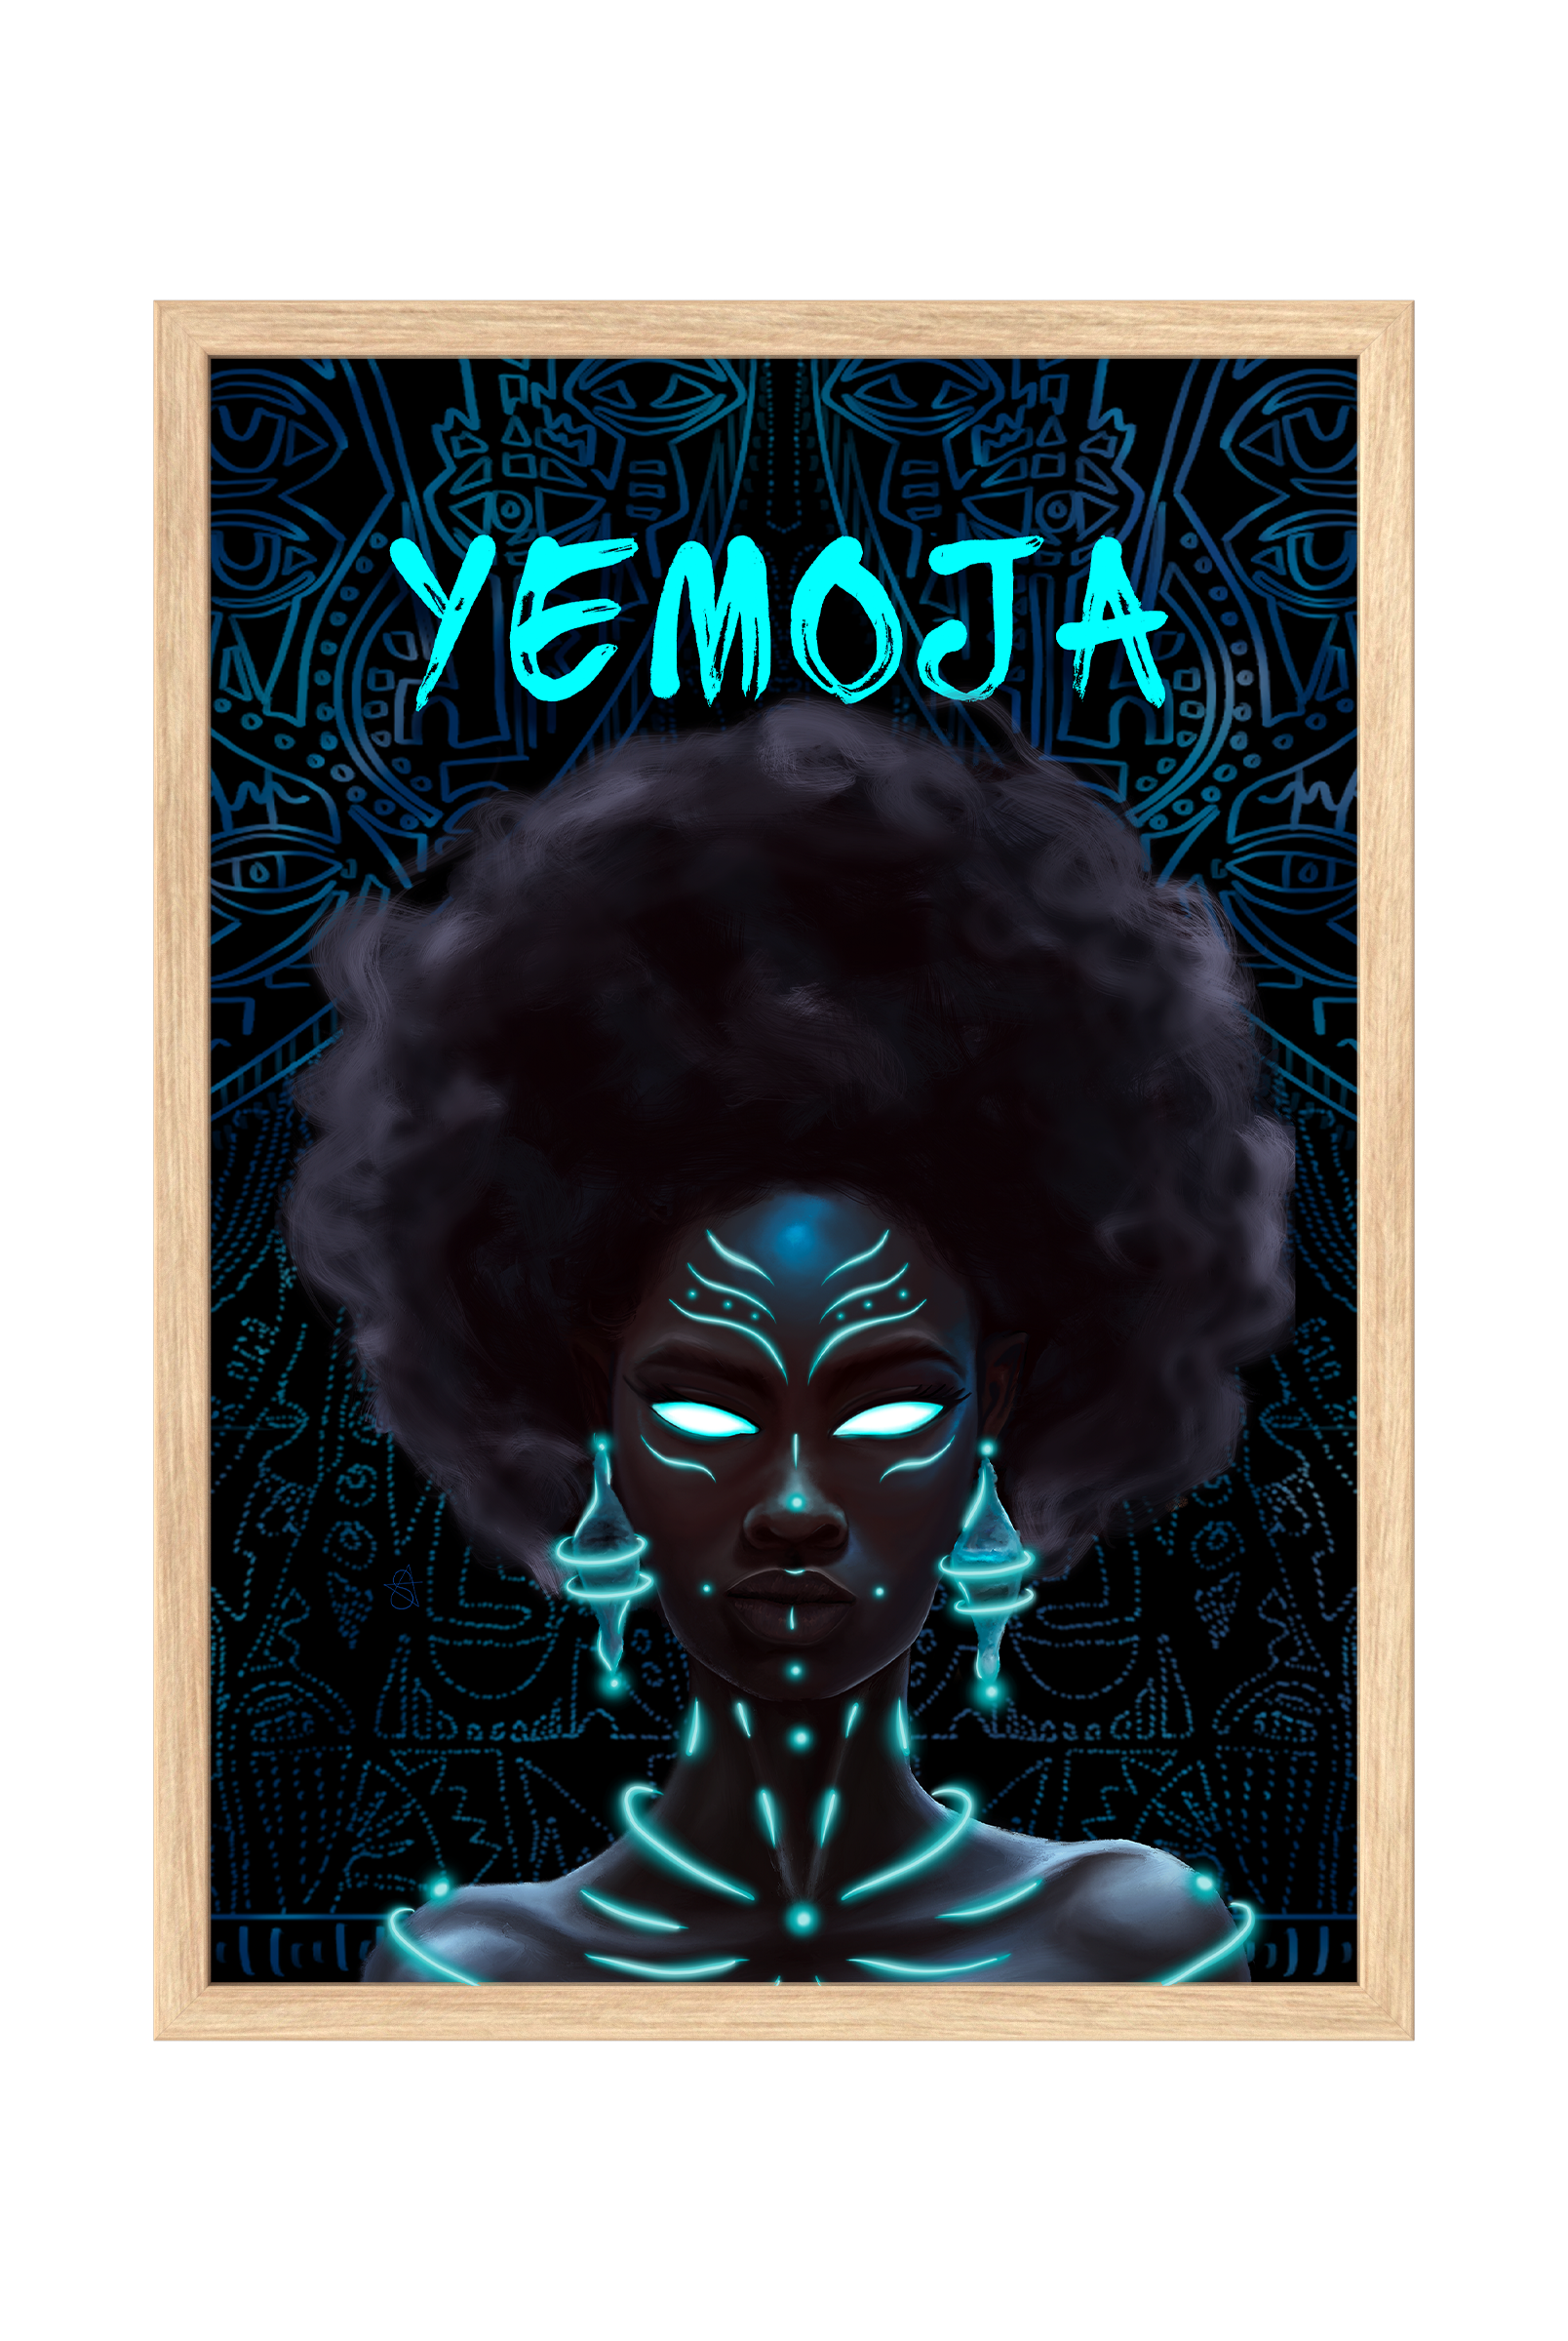 Yemoja Holographic Art Print on high-quality matte or velvet paper, framed in gallery black, white, or natural maple, depicting Yoruba mother of all Orisas